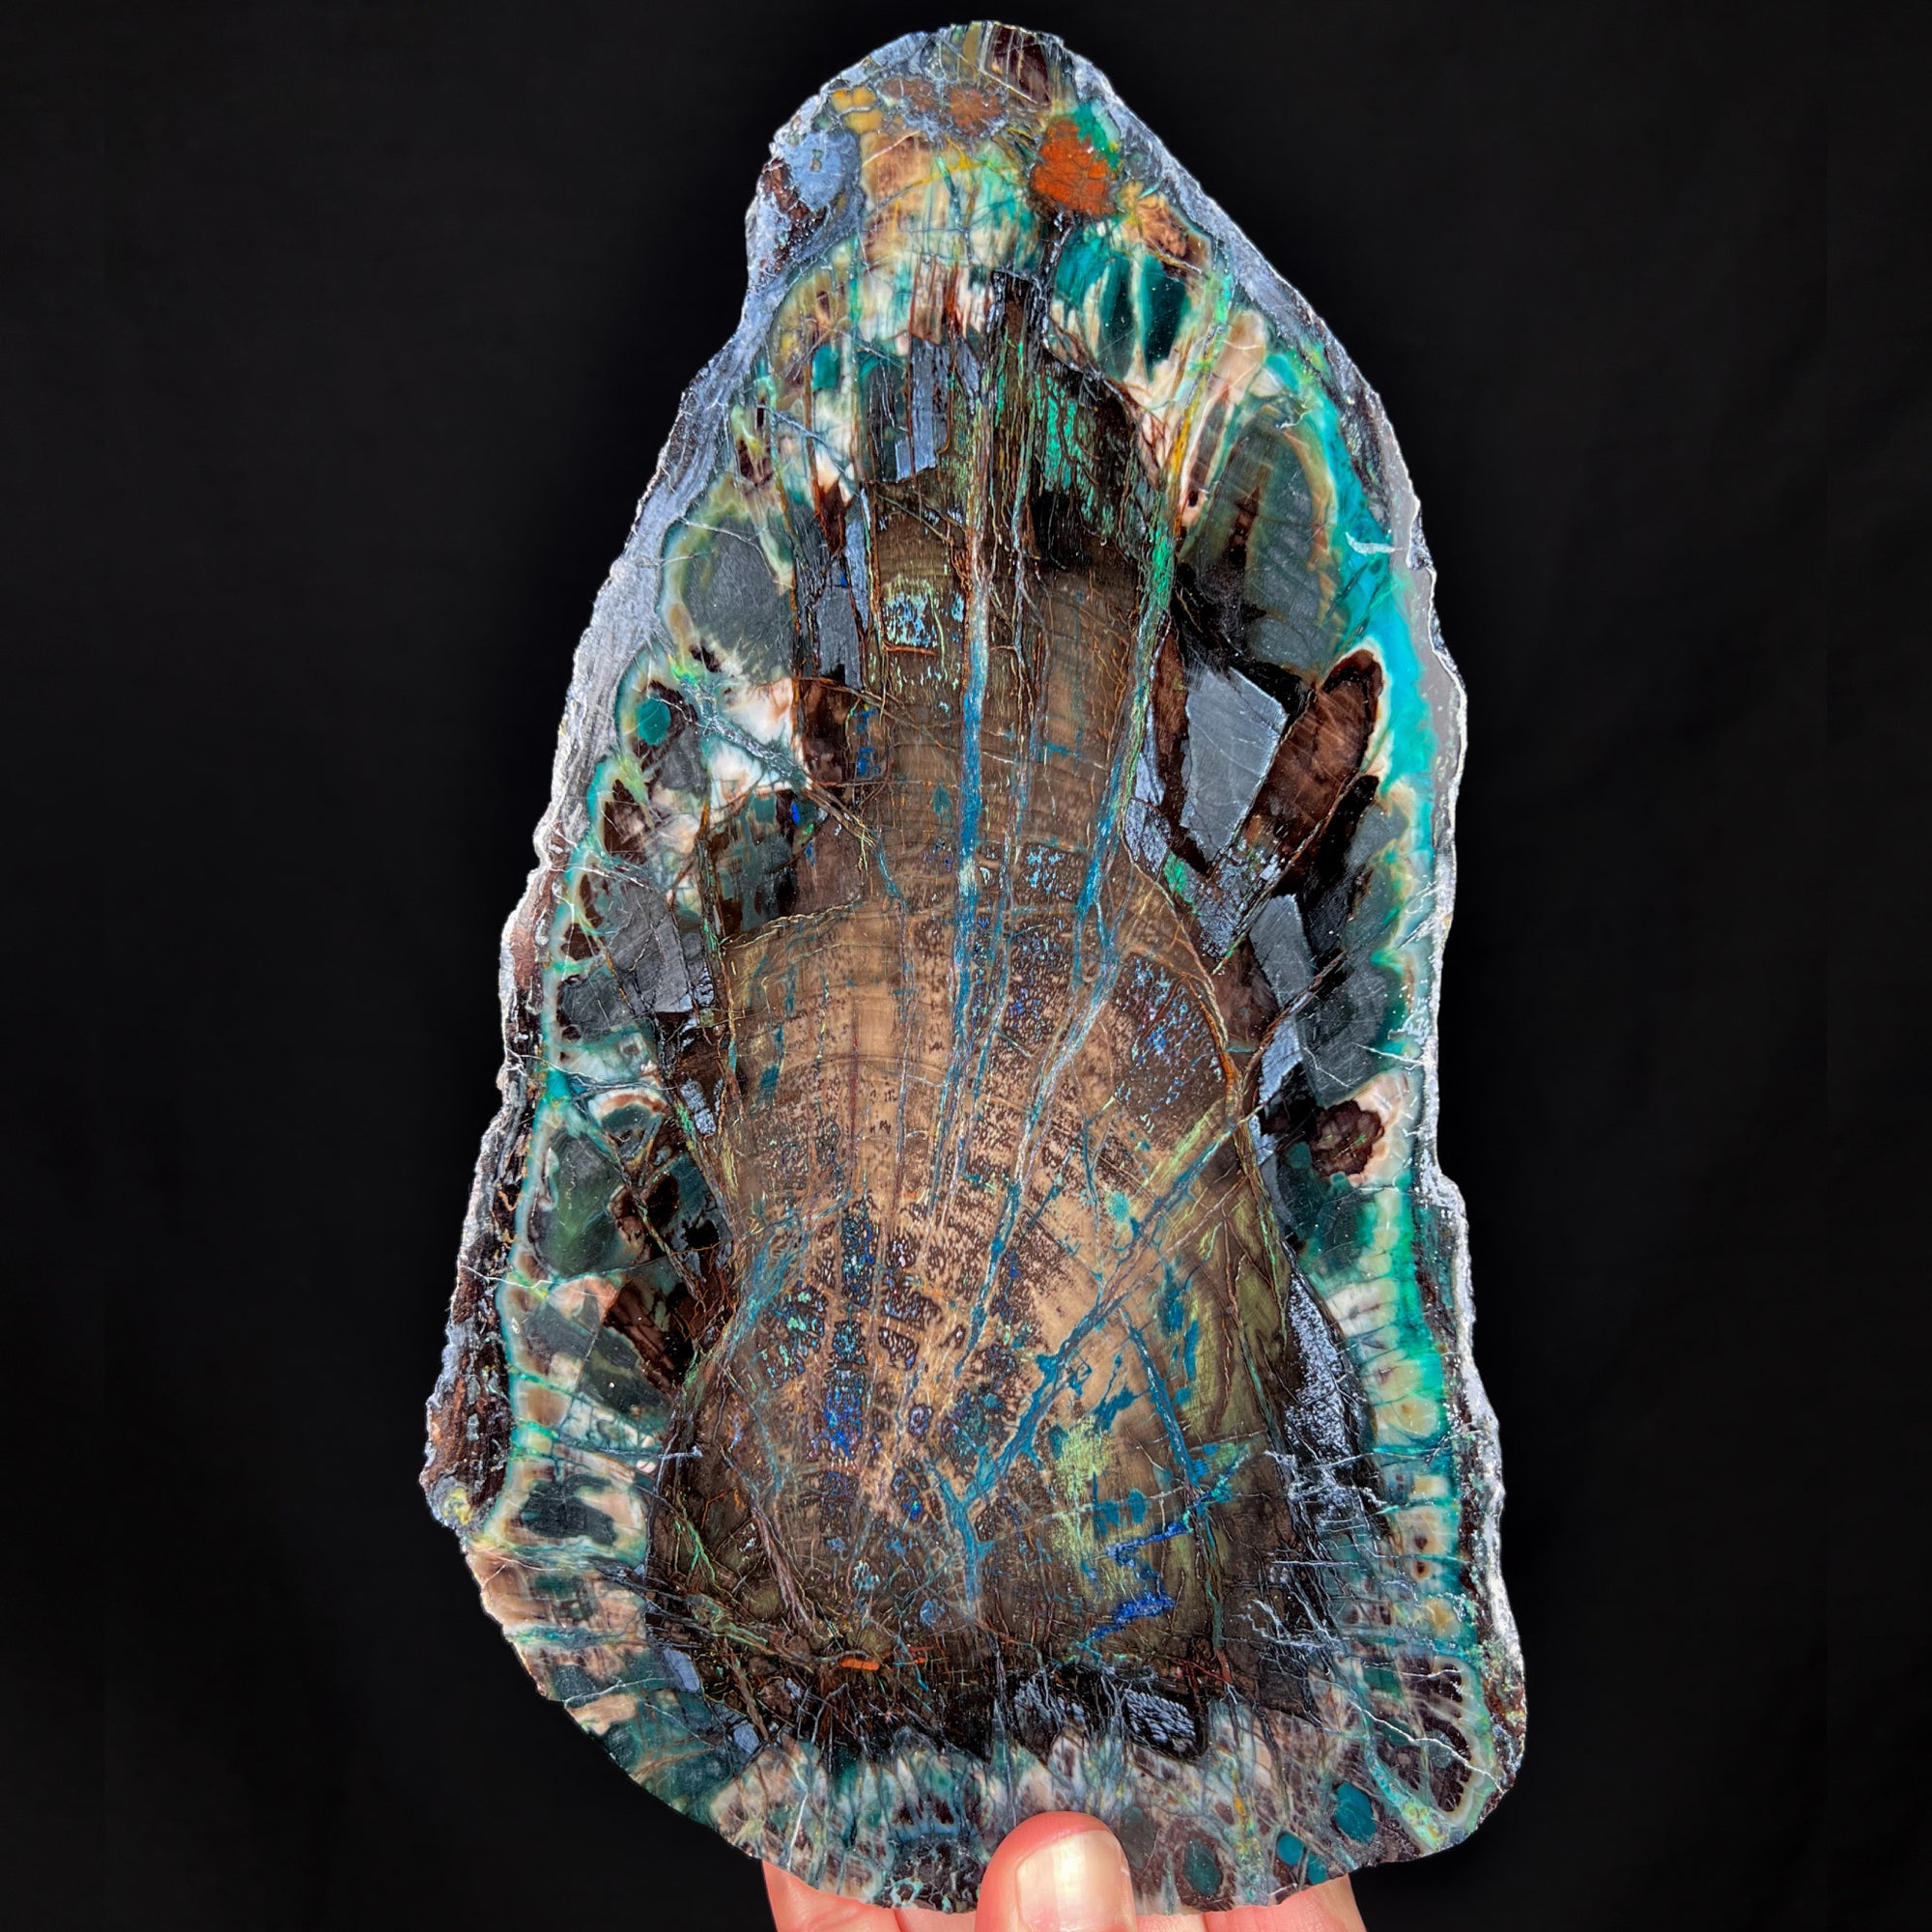 Rare Petrified Wood with Copper Mineralization Chrysocolla and Azurite